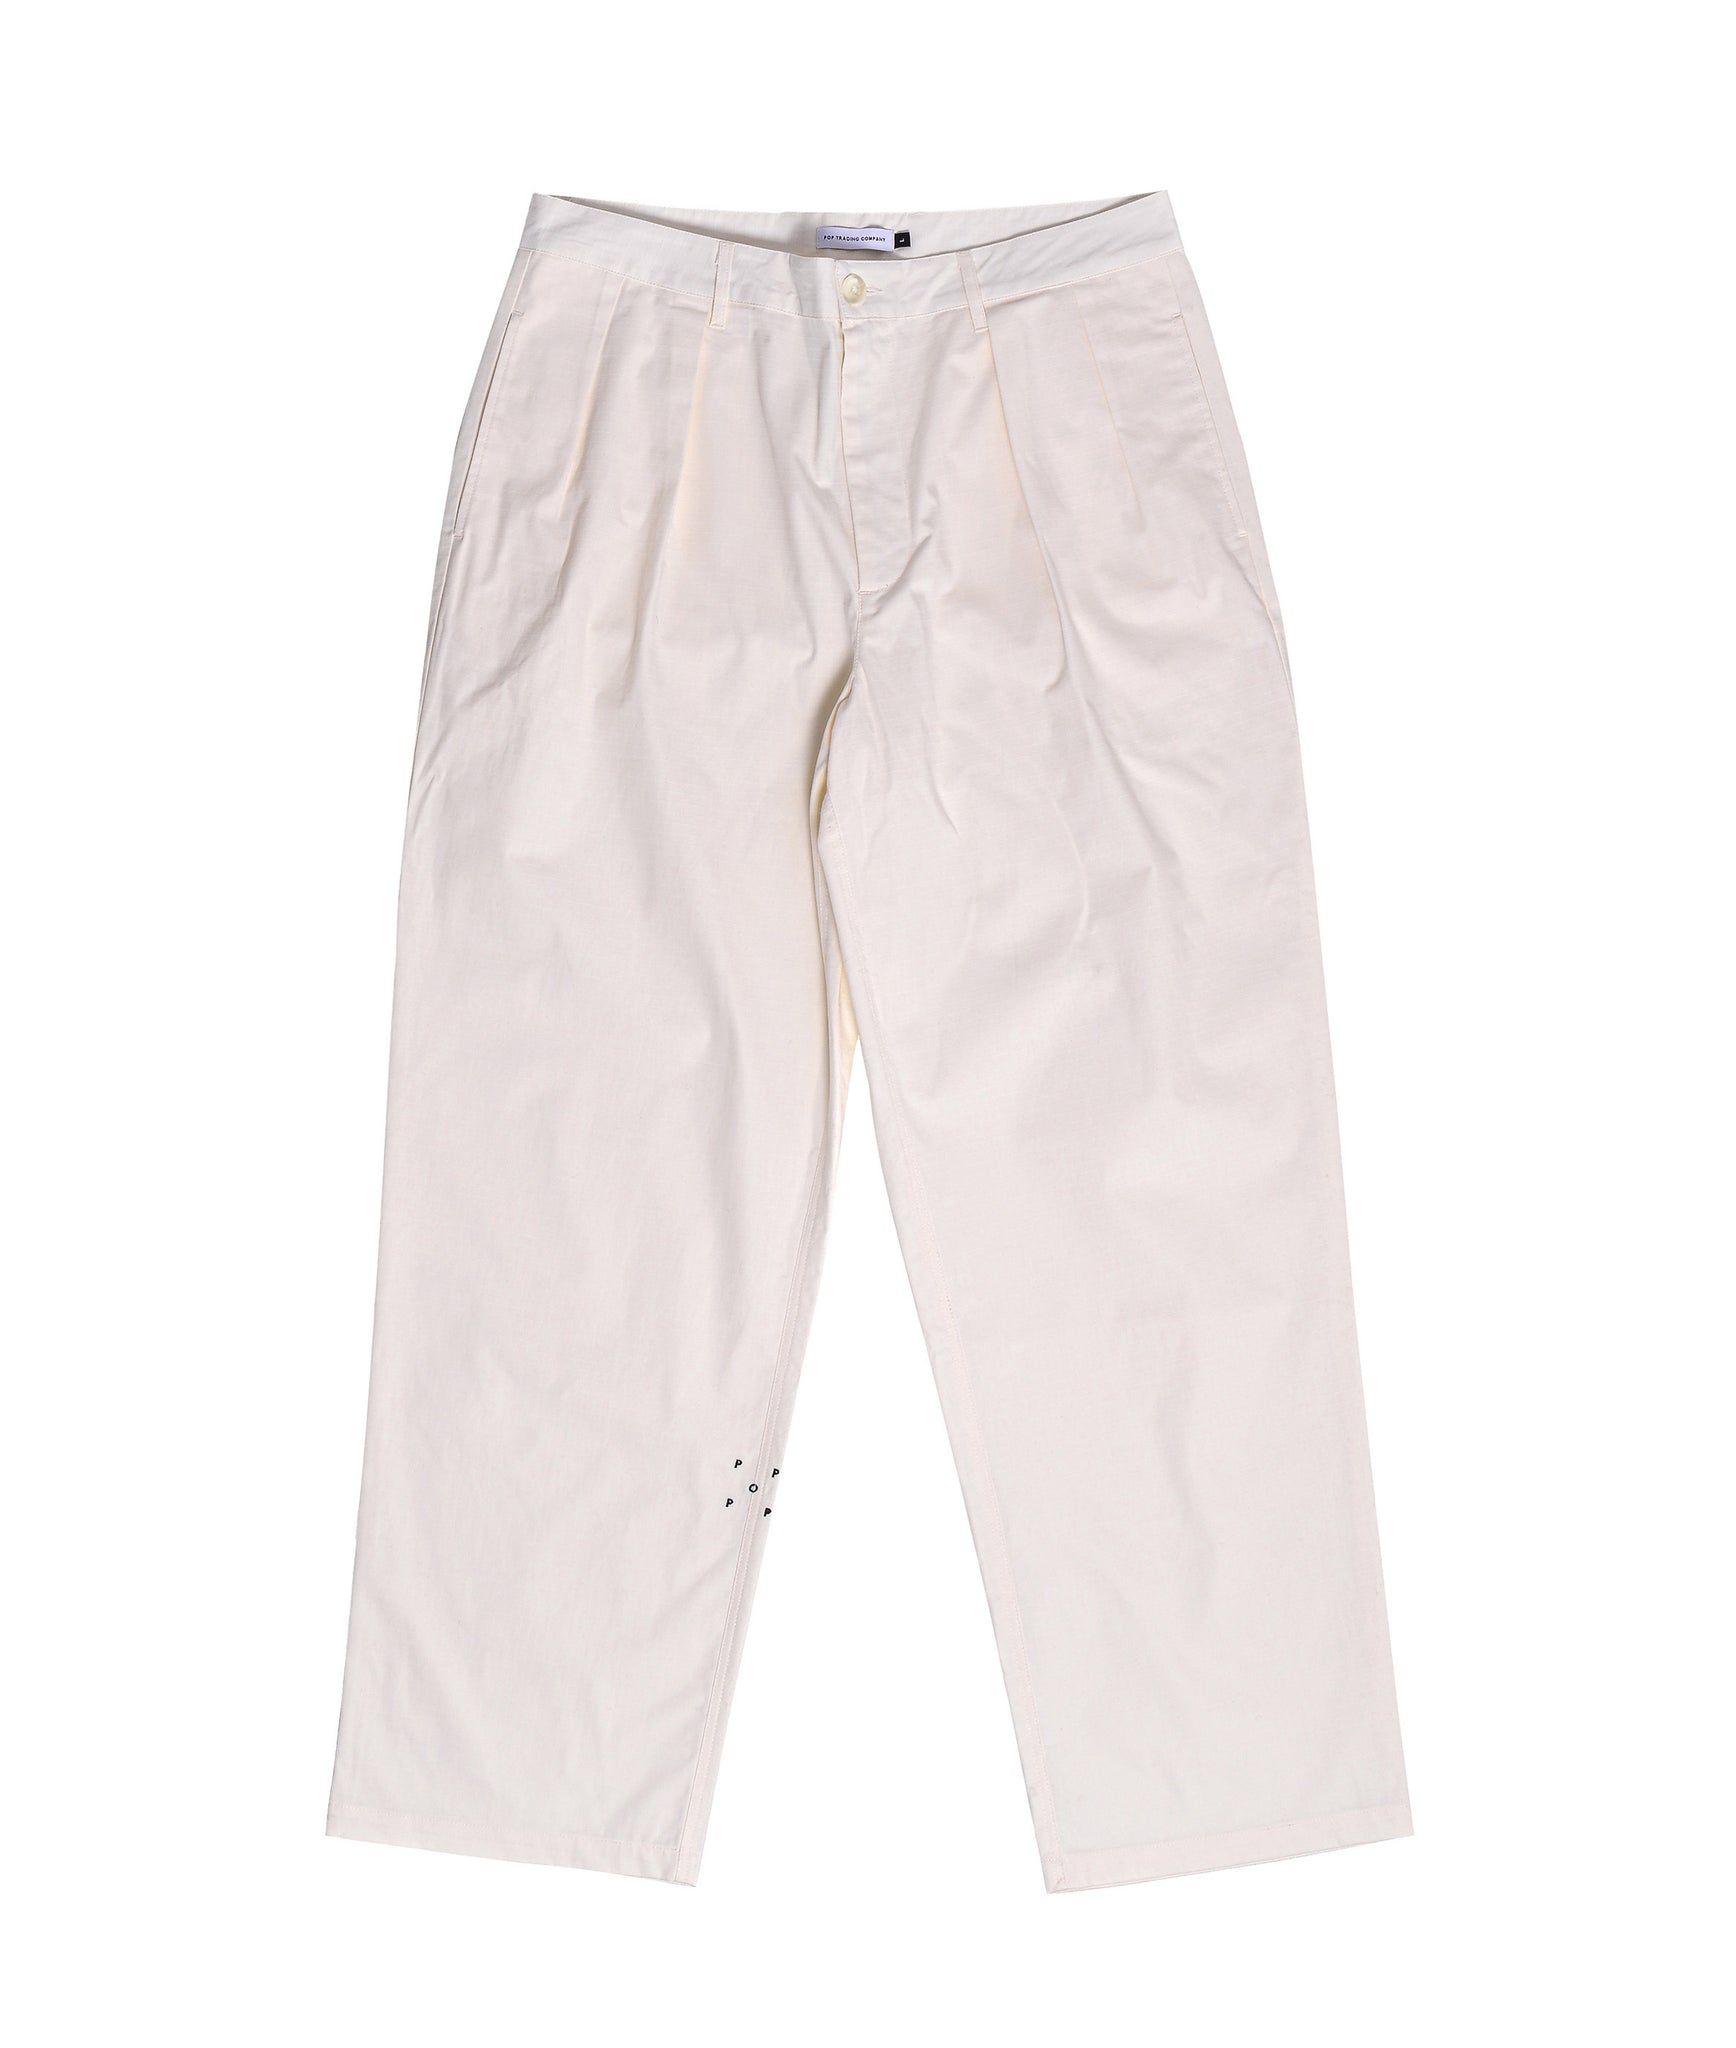 Hewitt Suit Pant - Off-White